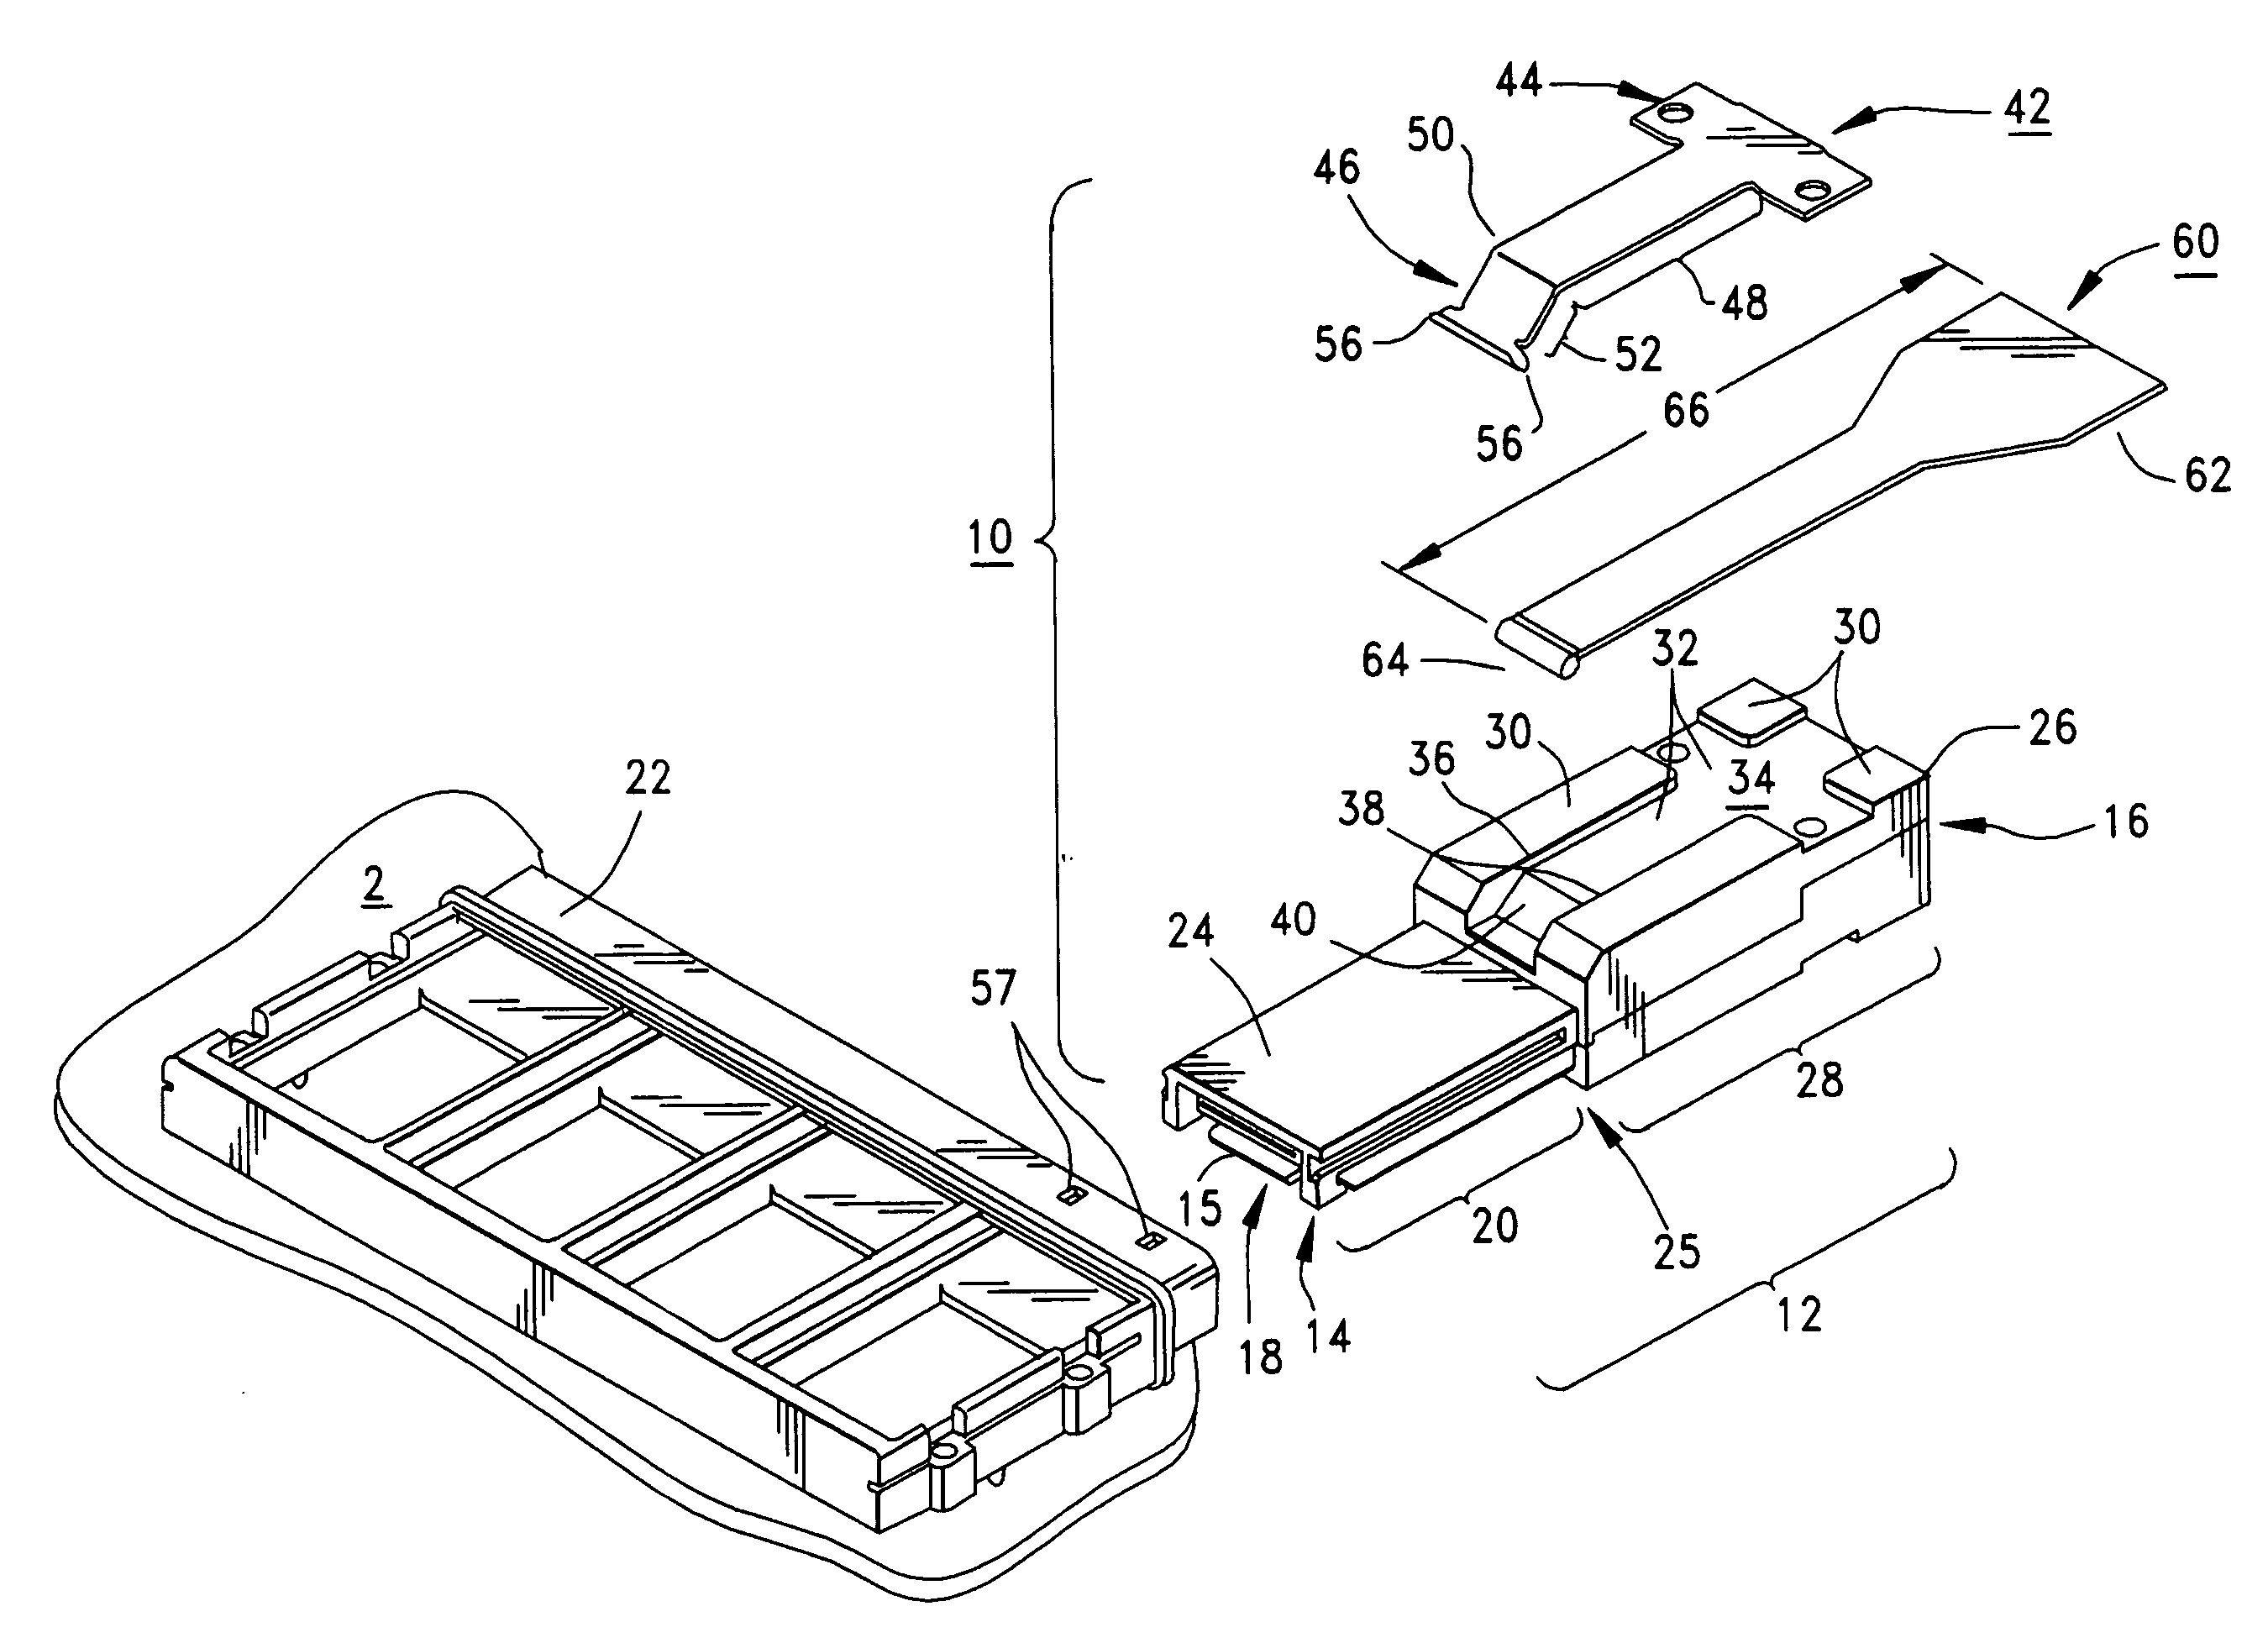 Low profile latching connector and pull tab for unlatching same